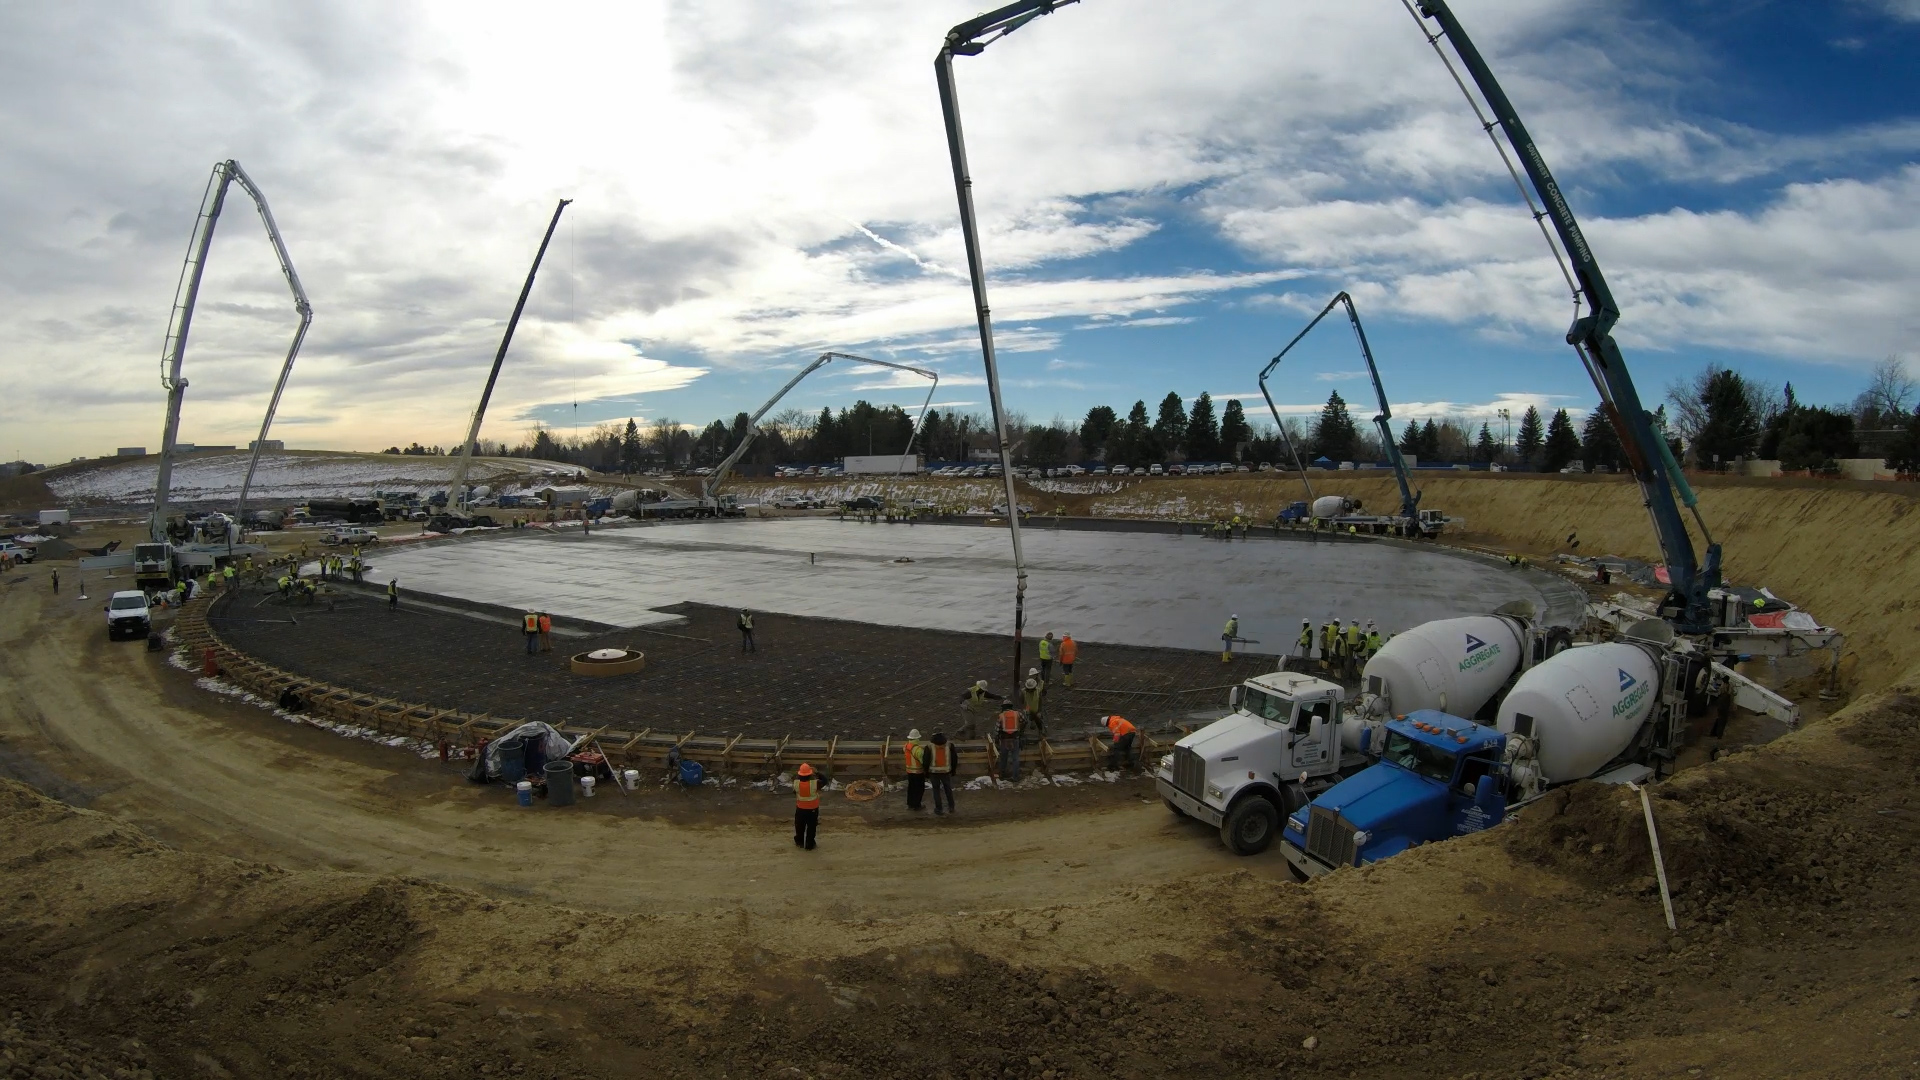 Denver Water is in the middle of a $100 million project to improve the safety and reliability of its Hillcrest facility by replacing two 15-million-gallon underground water storage tanks with three 15-million-gallon tanks, and a pump station.